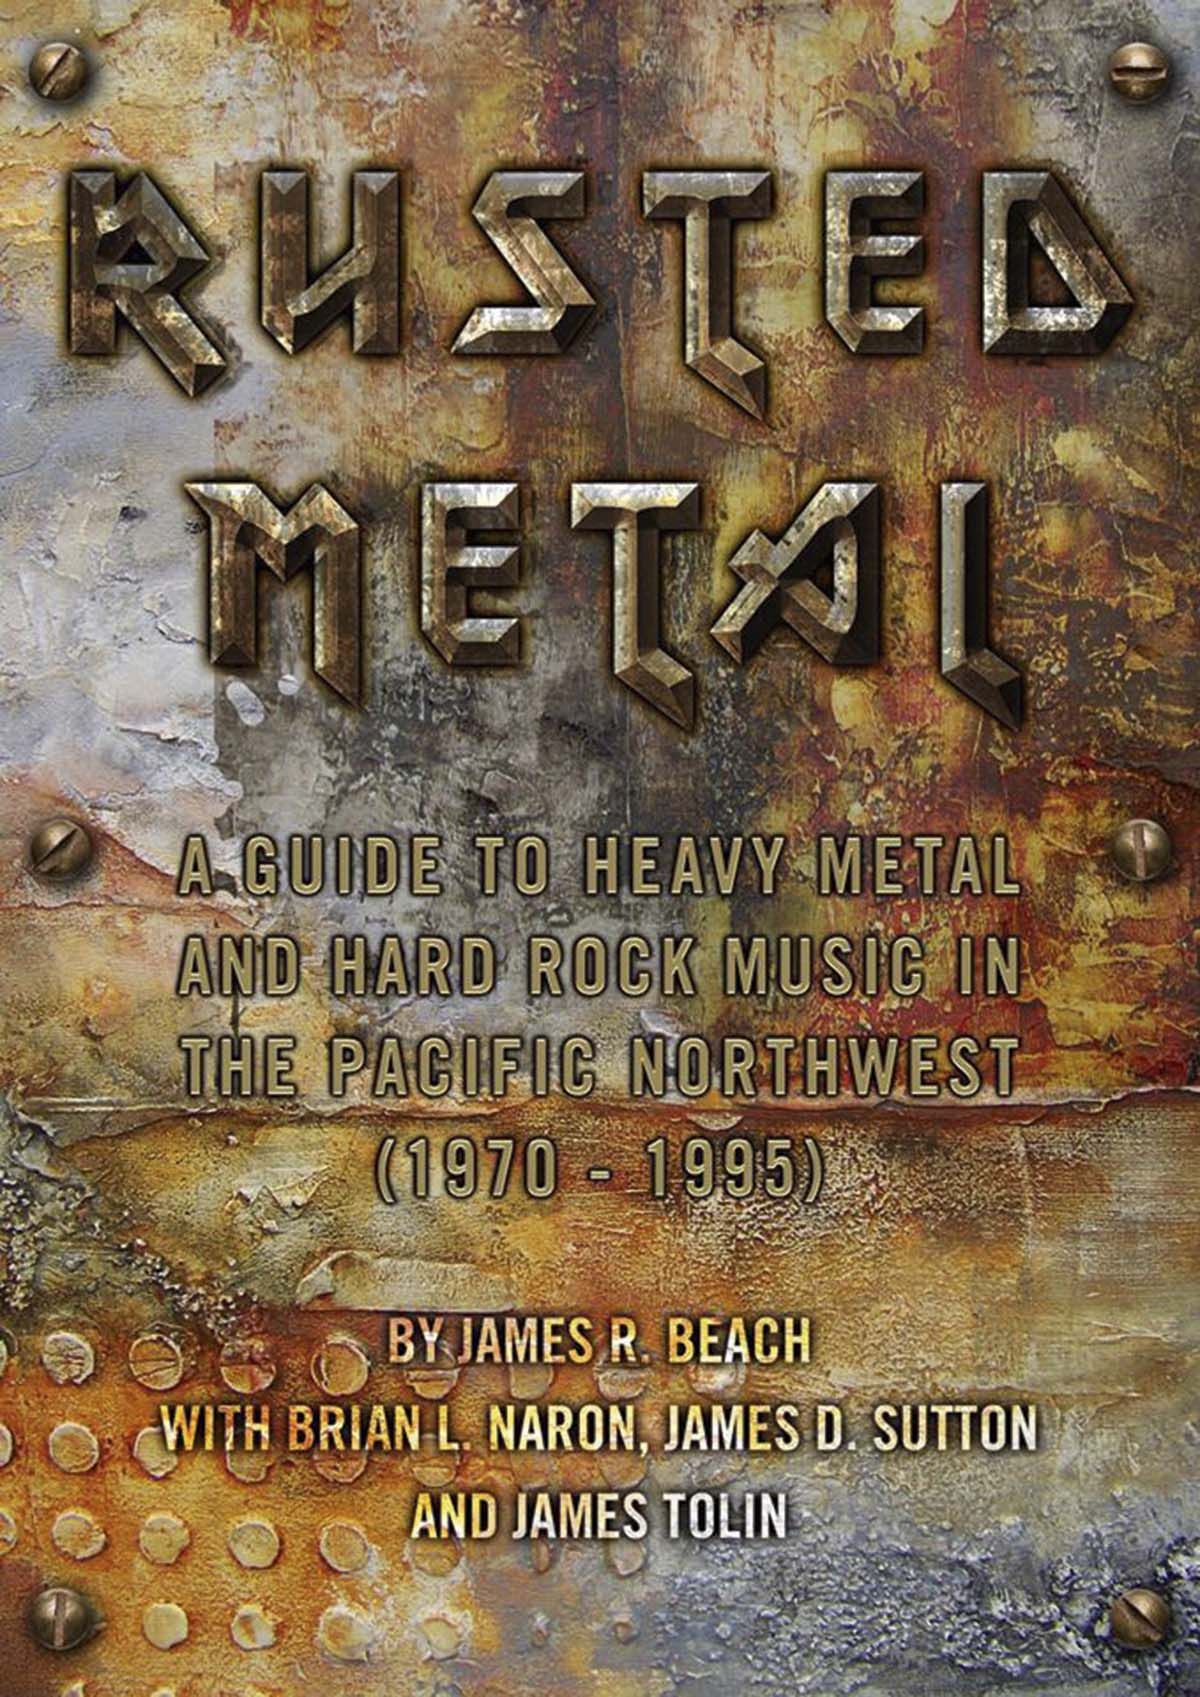 Rusted Metal: A Guide To Heavy Metal And Hard Rock Music In The Pacific Northwest (1970-1995)